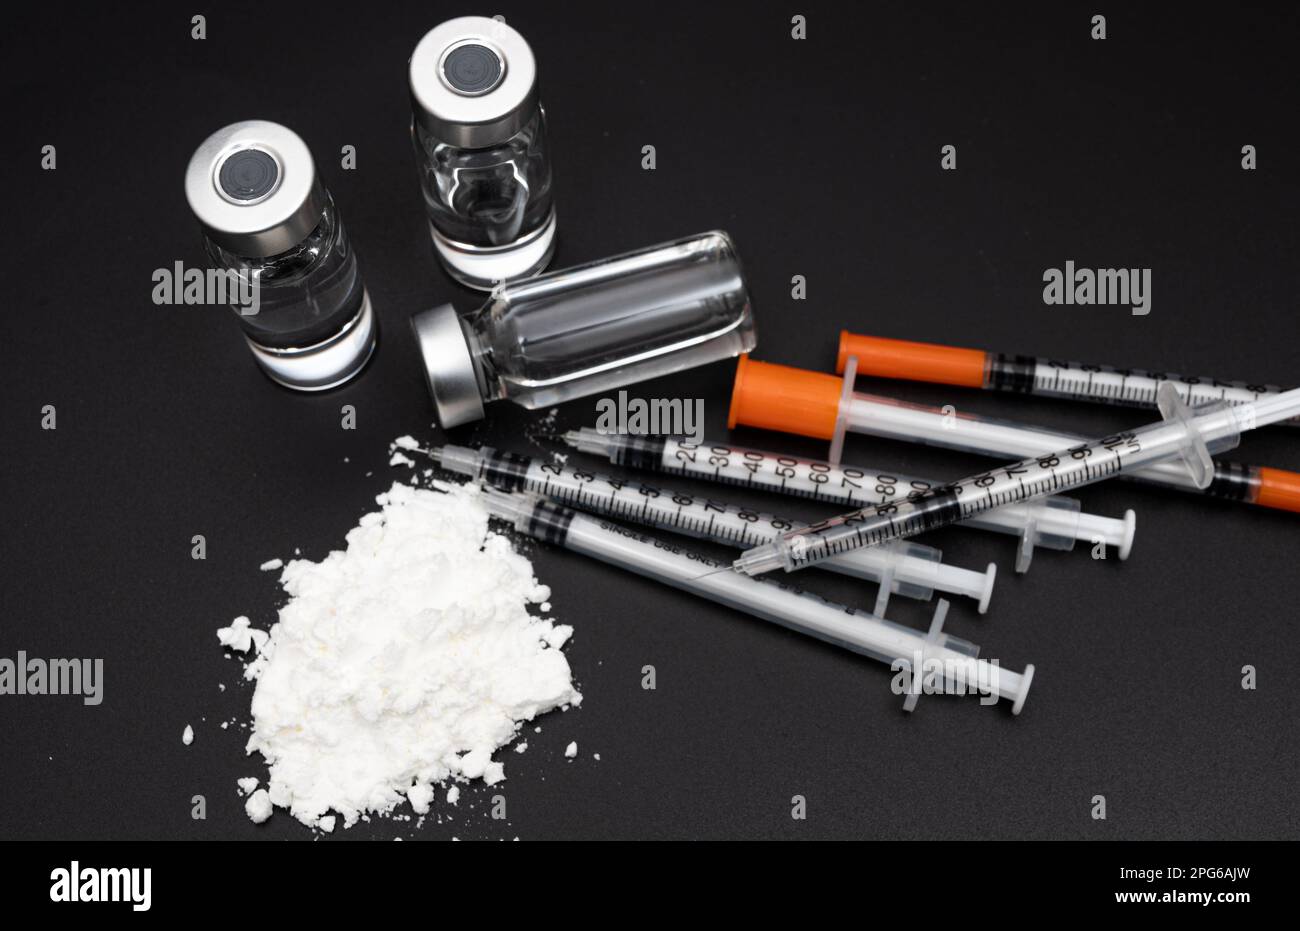 Drug crime concept with white powder and disposable syringe on black background Stock Photo